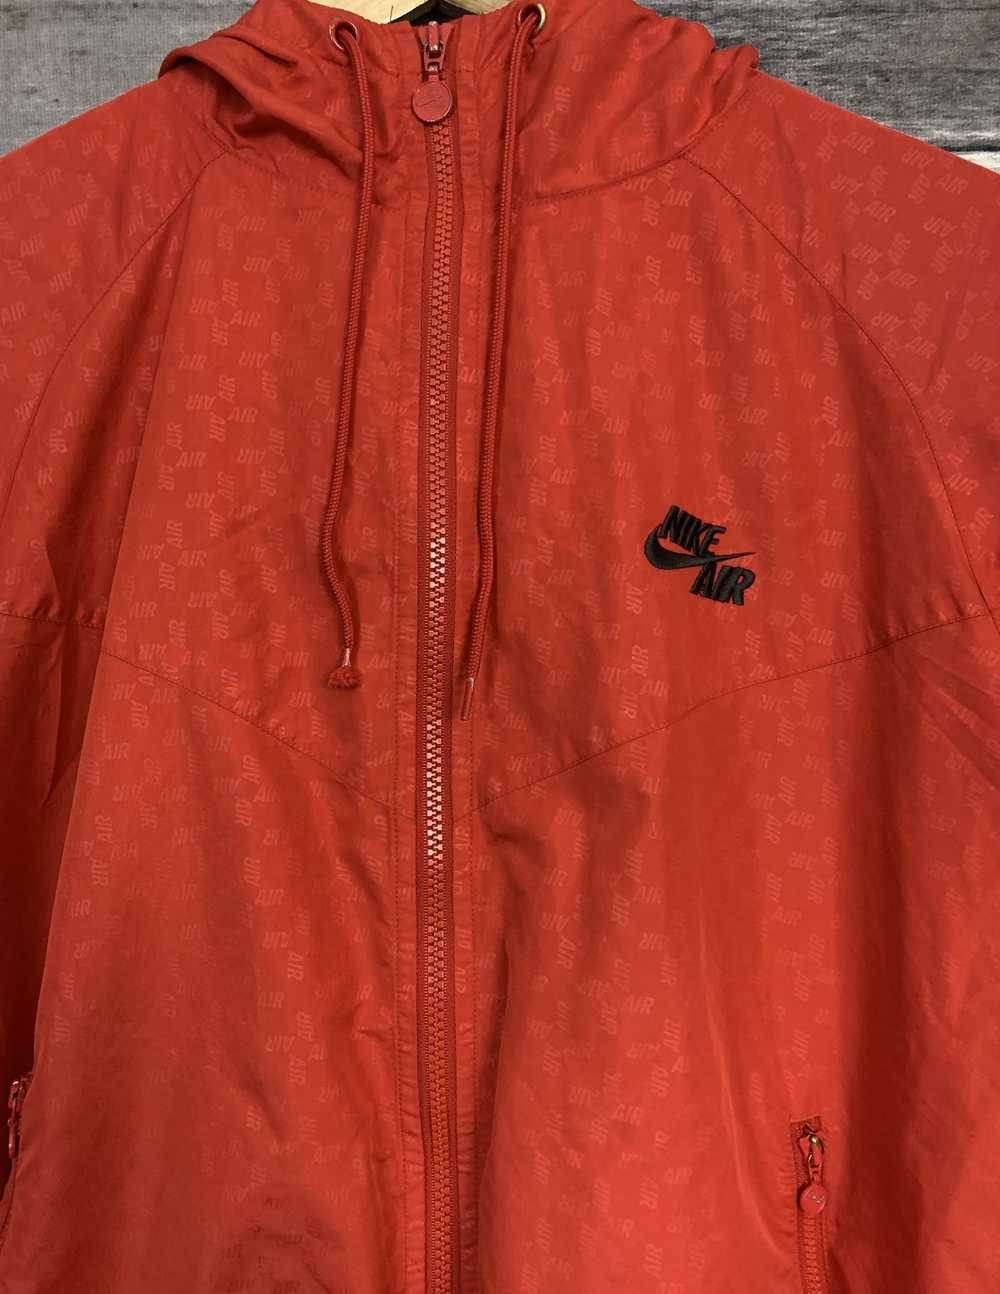 Nike Nike Air all over print Red jacket - image 2